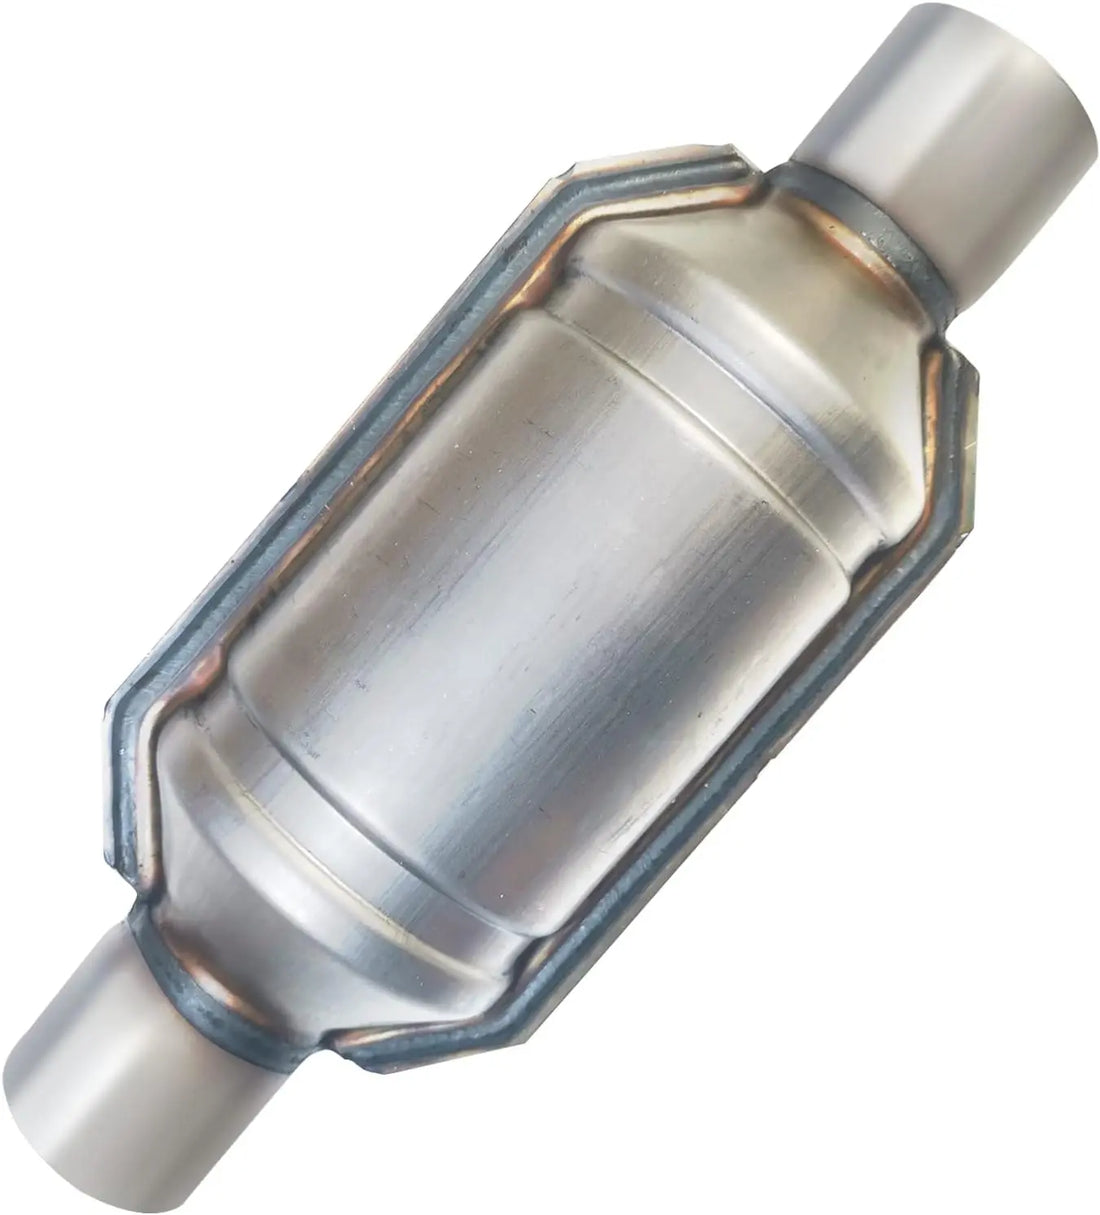 PULCHERFLOW 2.25 Inch Inlet/Outlet Universal Catalytic Converter with Heat Shield Stainless Steel (EPA Compliant) Pulcherflow